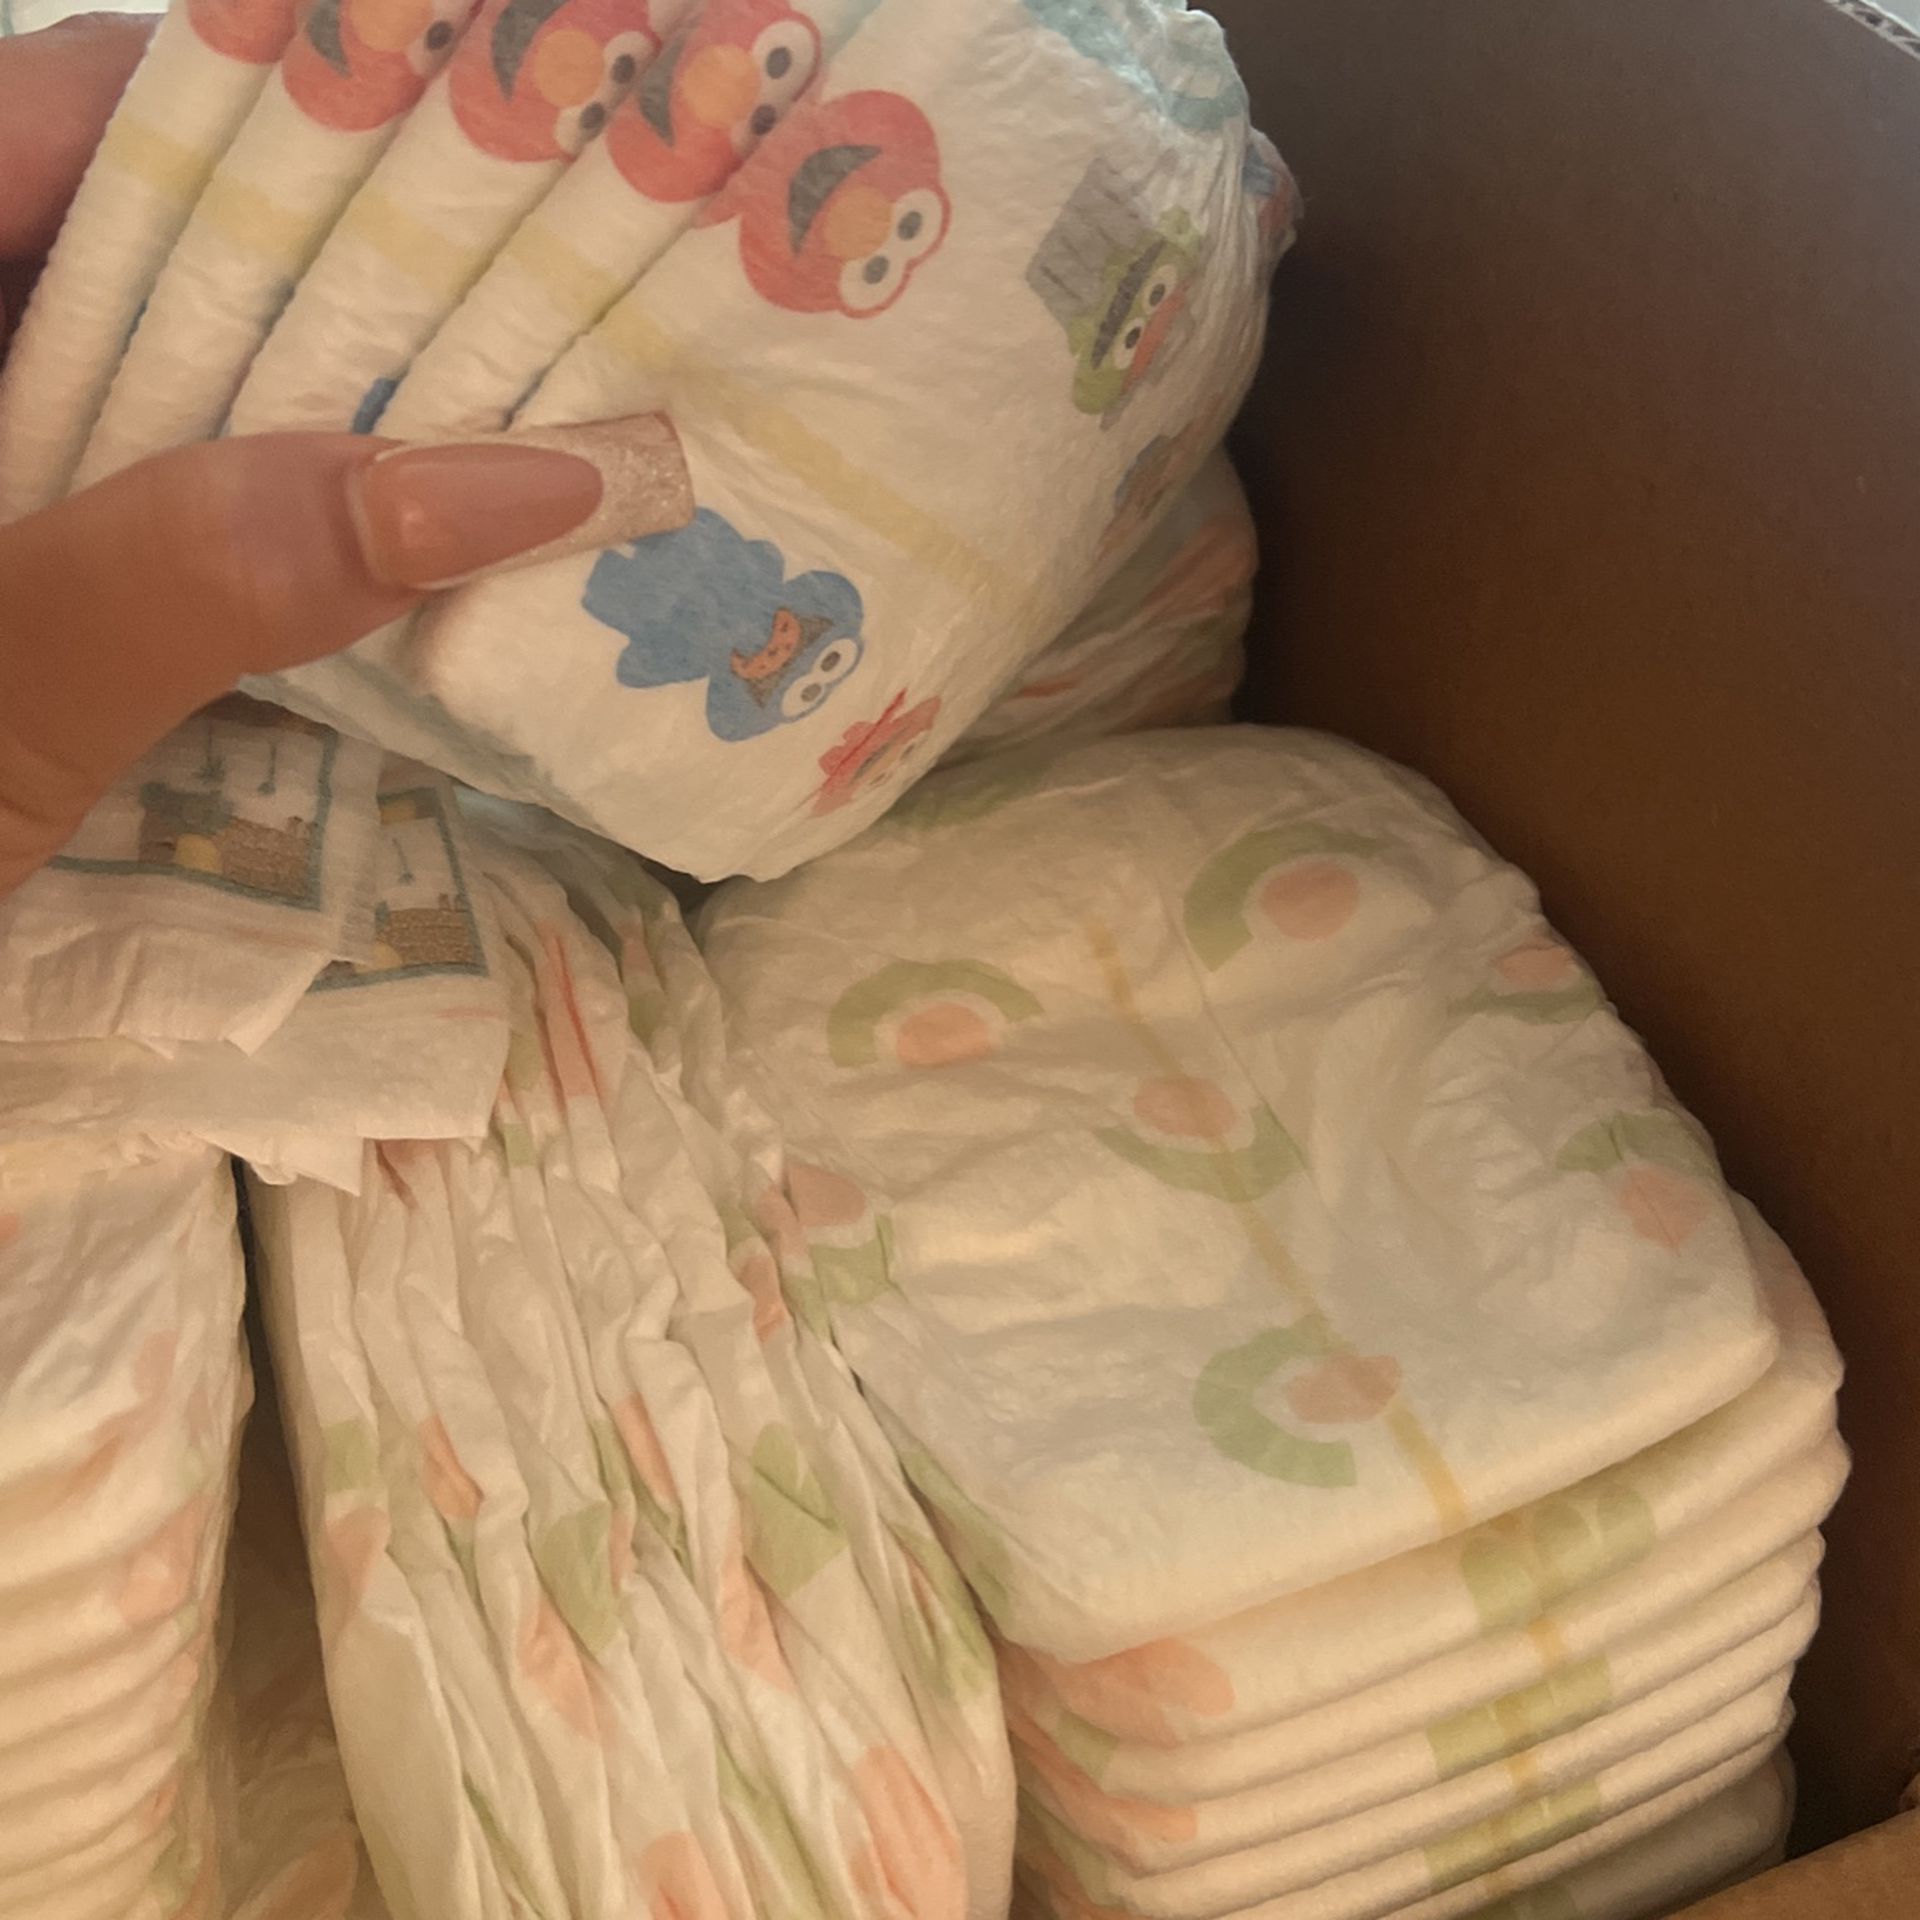 Diapers Size 2